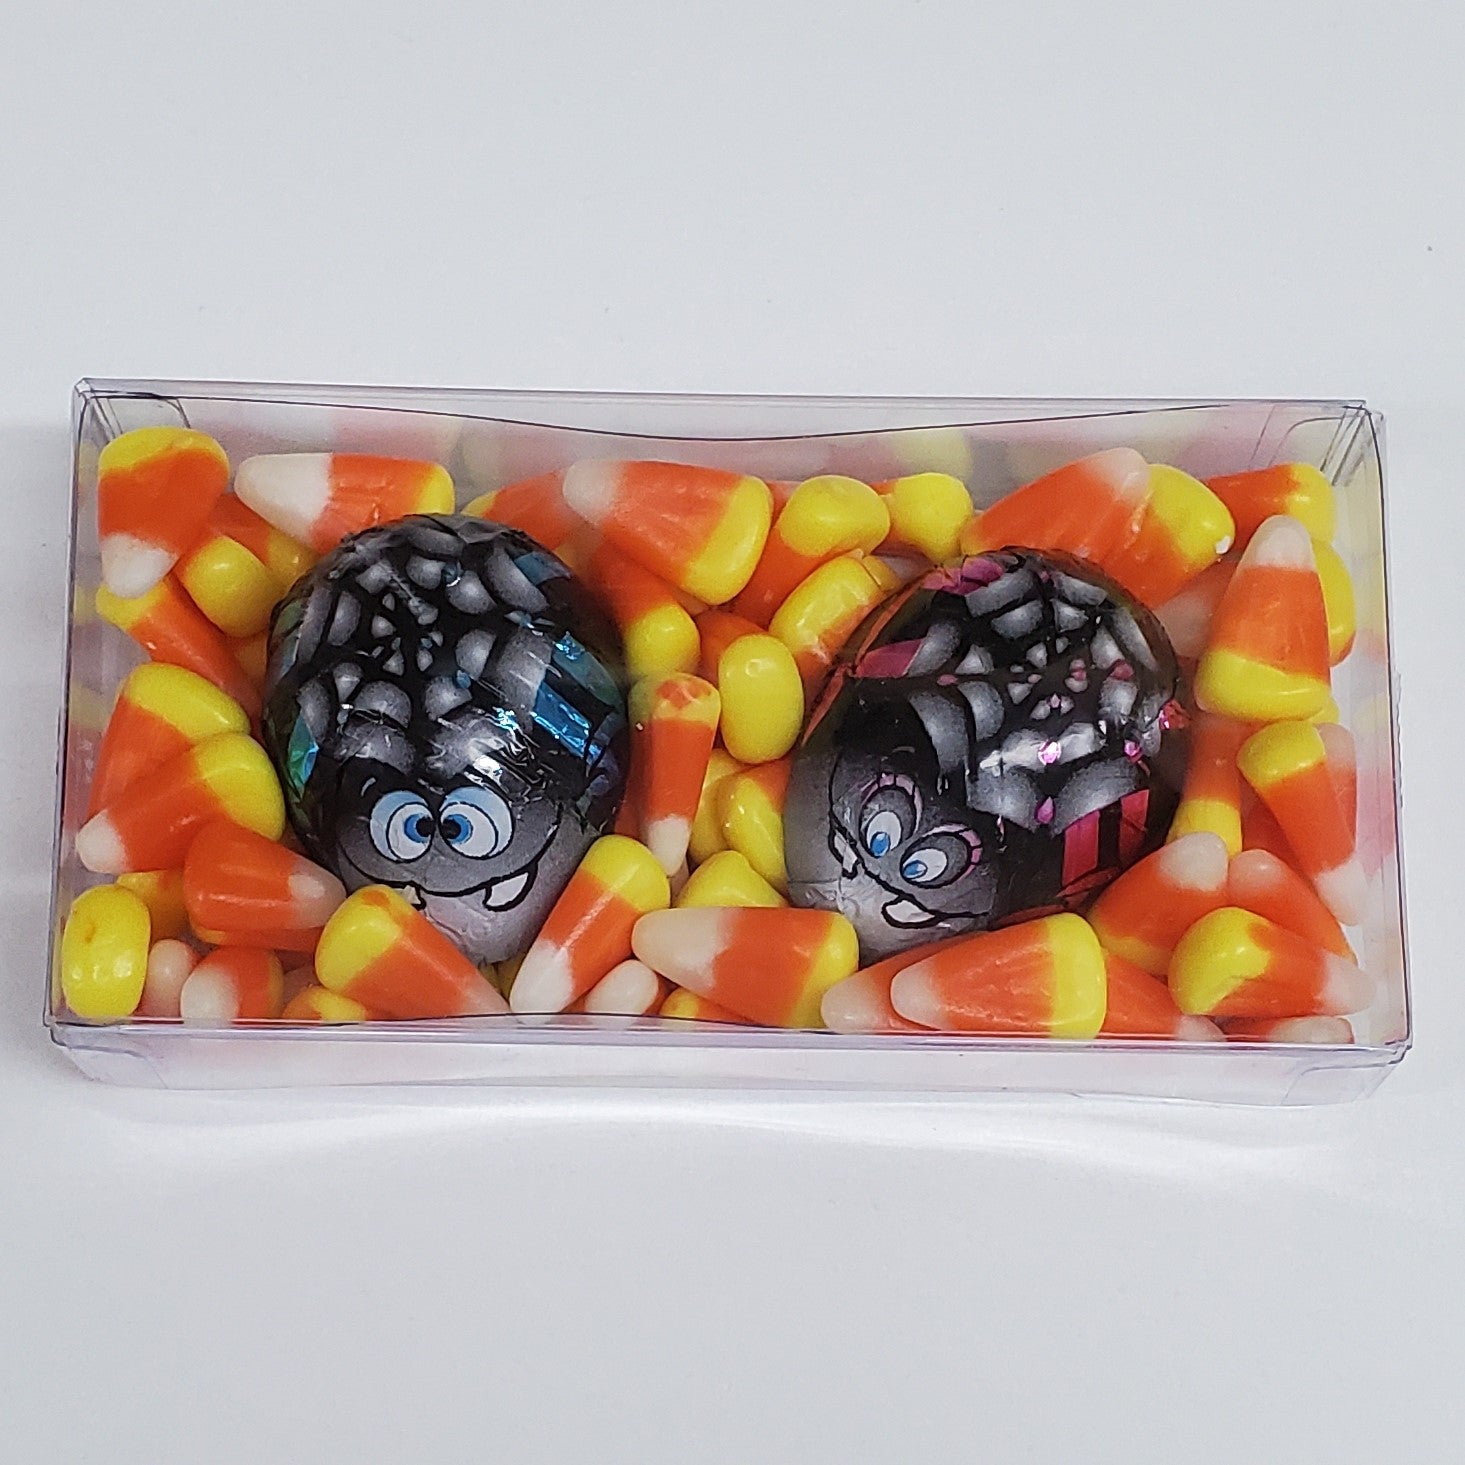 Spider Bites Gift Box - 2 Milk Chocolate Spiders and Candy Corn